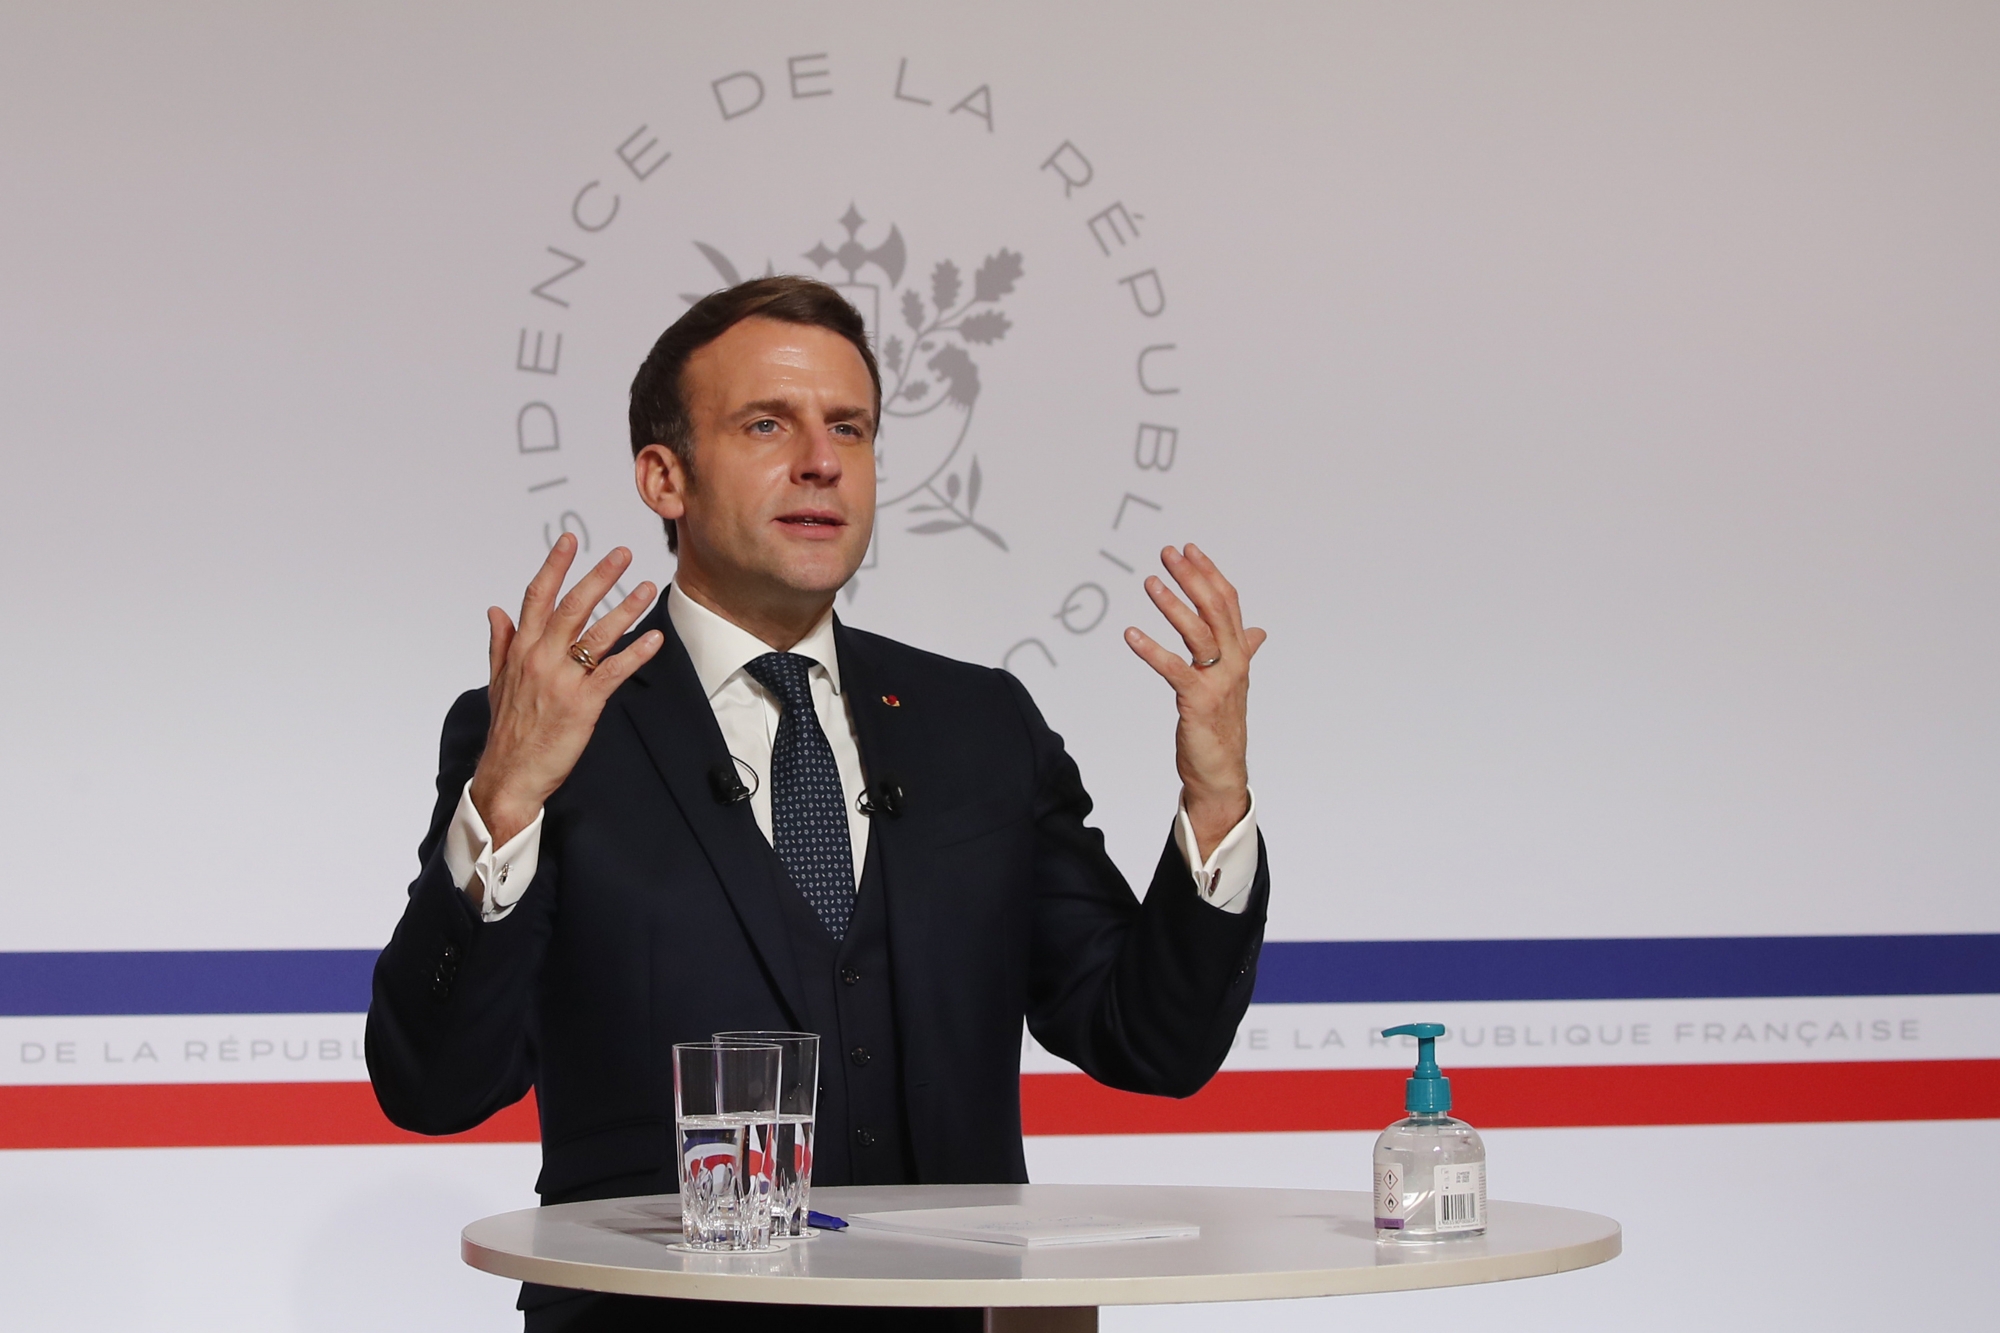 French President Emmanuel Macron, attends a video conference at the Elysee Palace in Paris, Tuesday, Jan. 26, 2021, with German Klaus Schwab, Founder and Executive Chairman of the World Economic Forum, WEF, on a video screen at the Davos Agenda in Geneva. The Davos Agenda from Jan. 25 to Jan. 29, 2021 is an online edition due to the coronavirus disease (COVID-19) outbreak. (AP Photo/Francois Mori, Pool) Le Nouvelliste